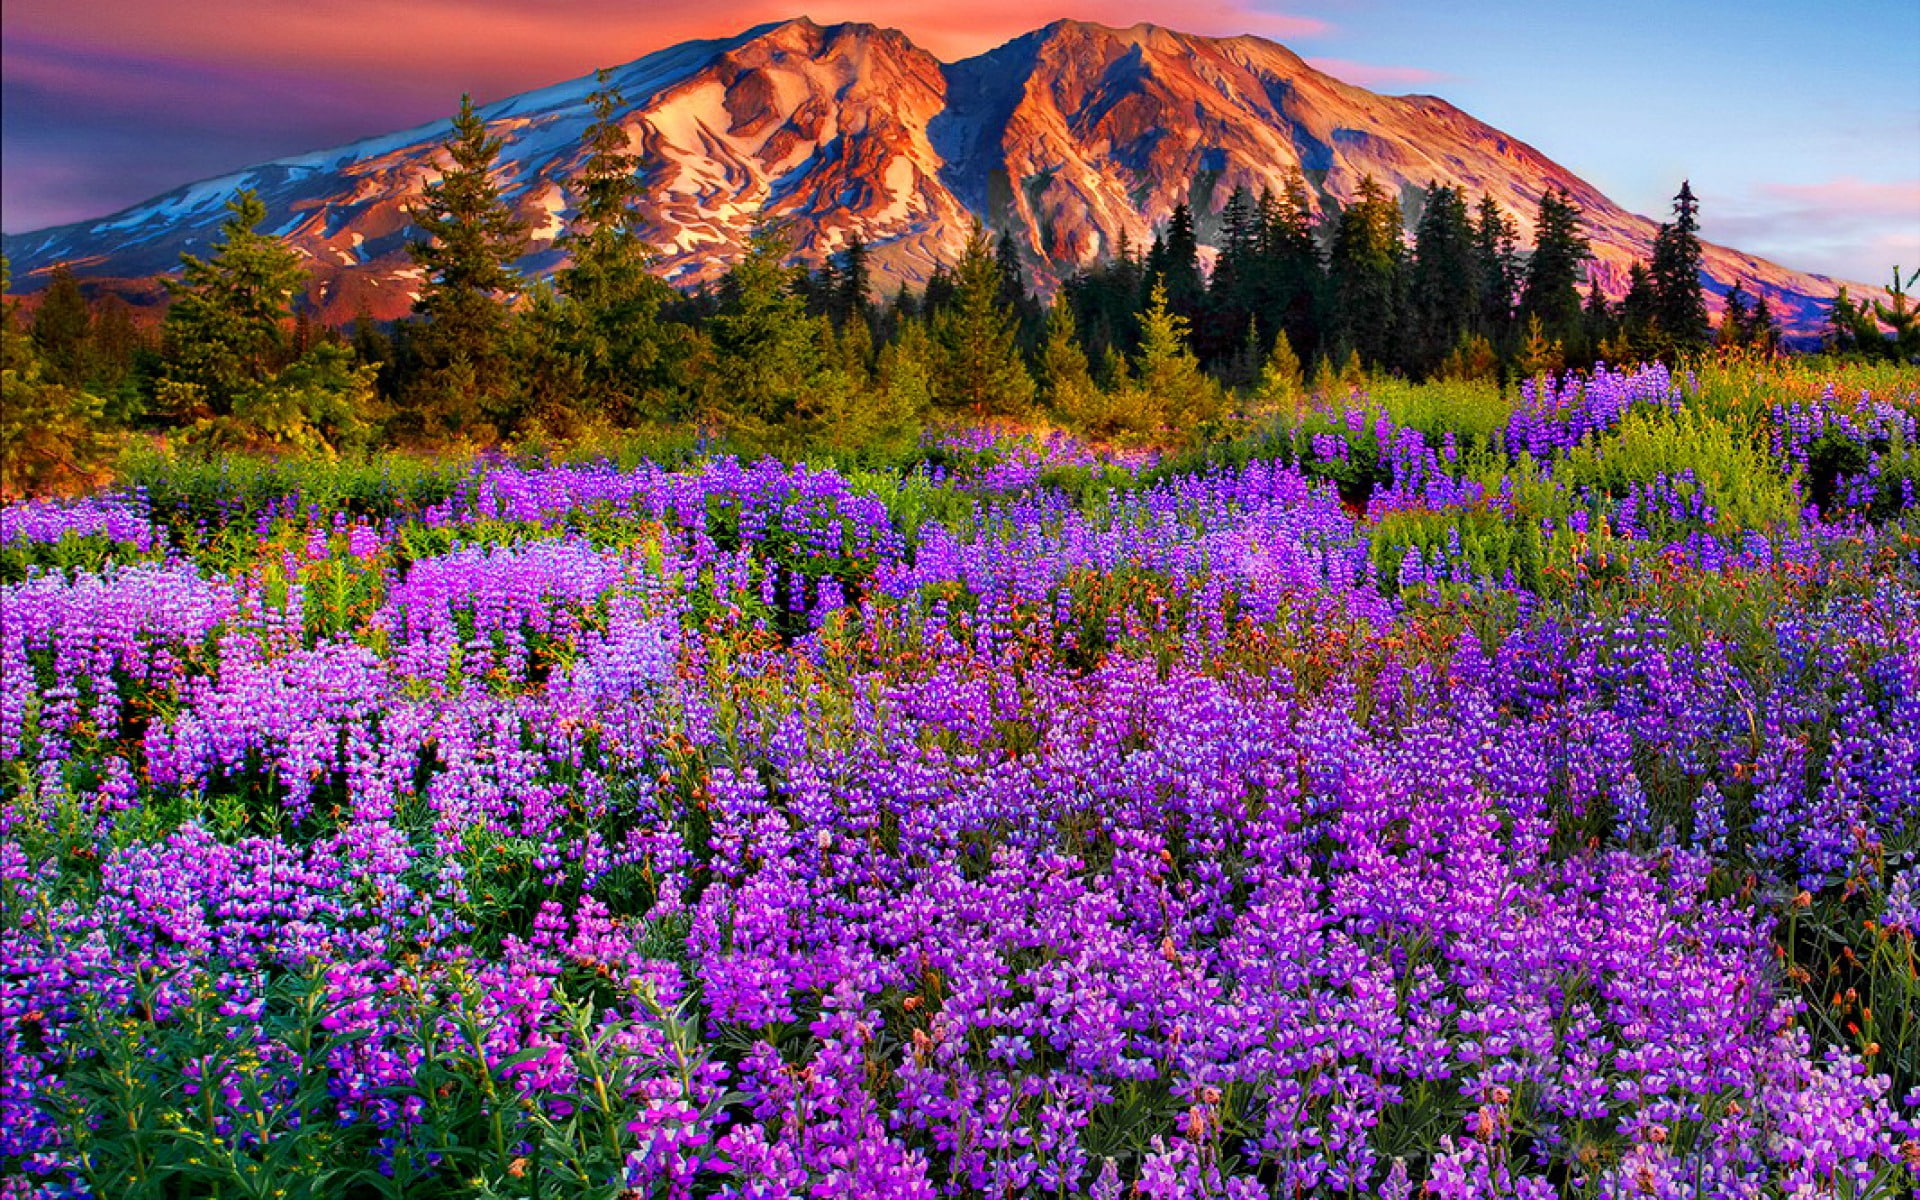 Landscape Purple Mountain Meadow With Flowers, Pine Trees, Mountains With Snow Red Cloud Beautiful Hd Wallpaper For Desktop 1920×1200